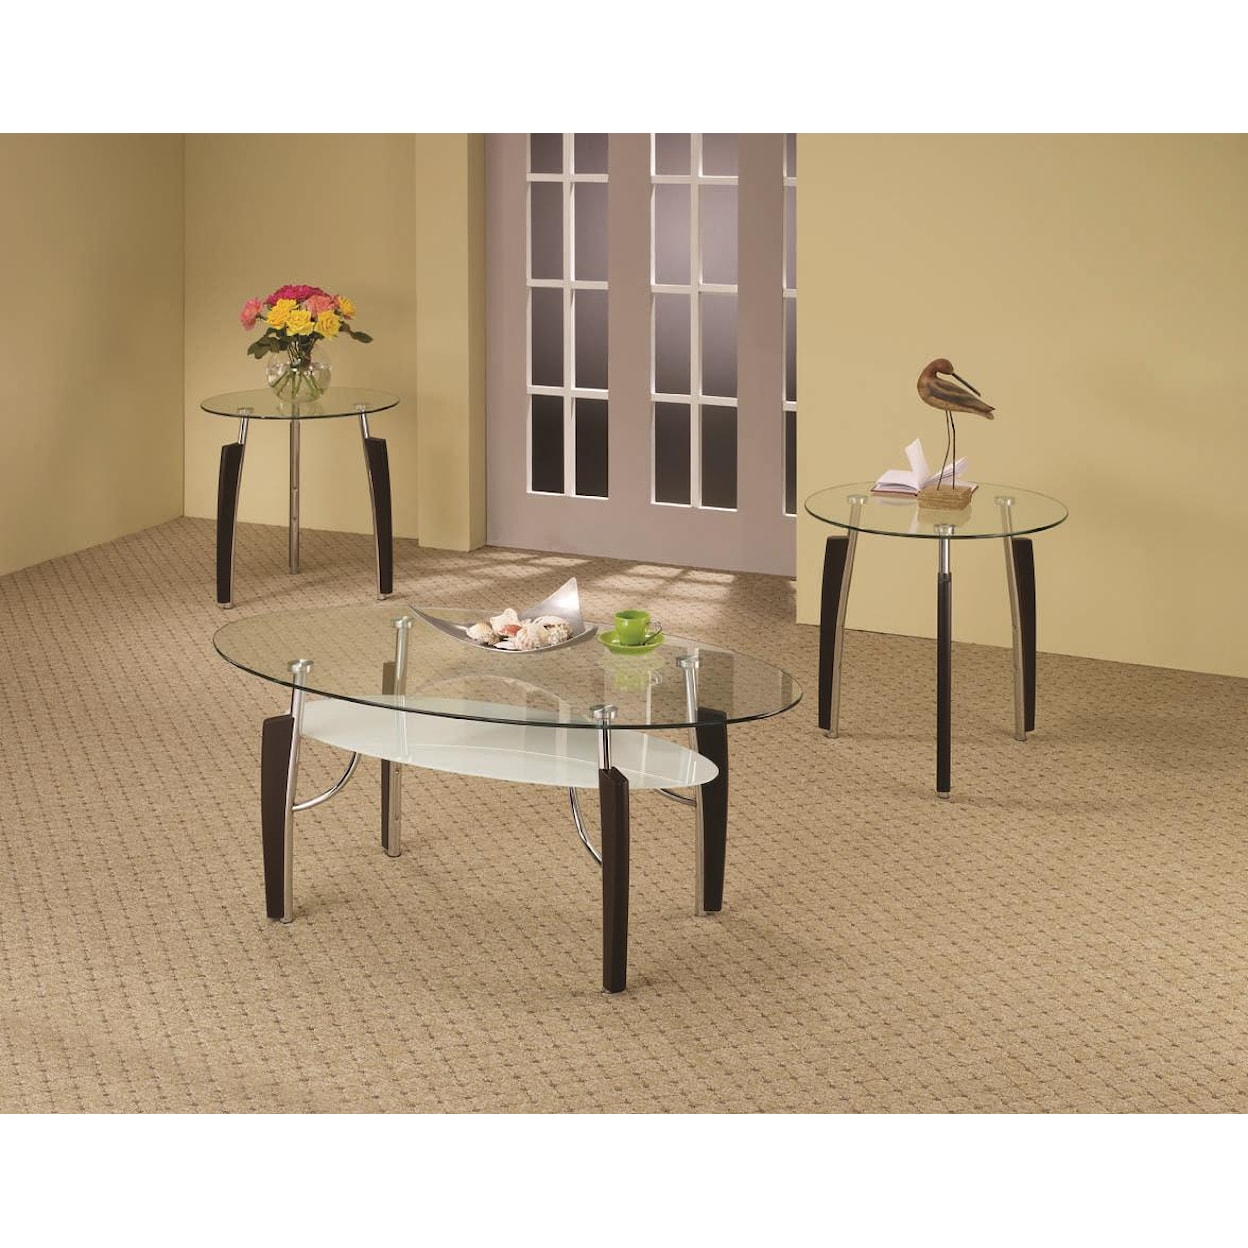 Michael Alan CSR Select Occasional Table Sets 3-Piece Glass Top Occasional Set